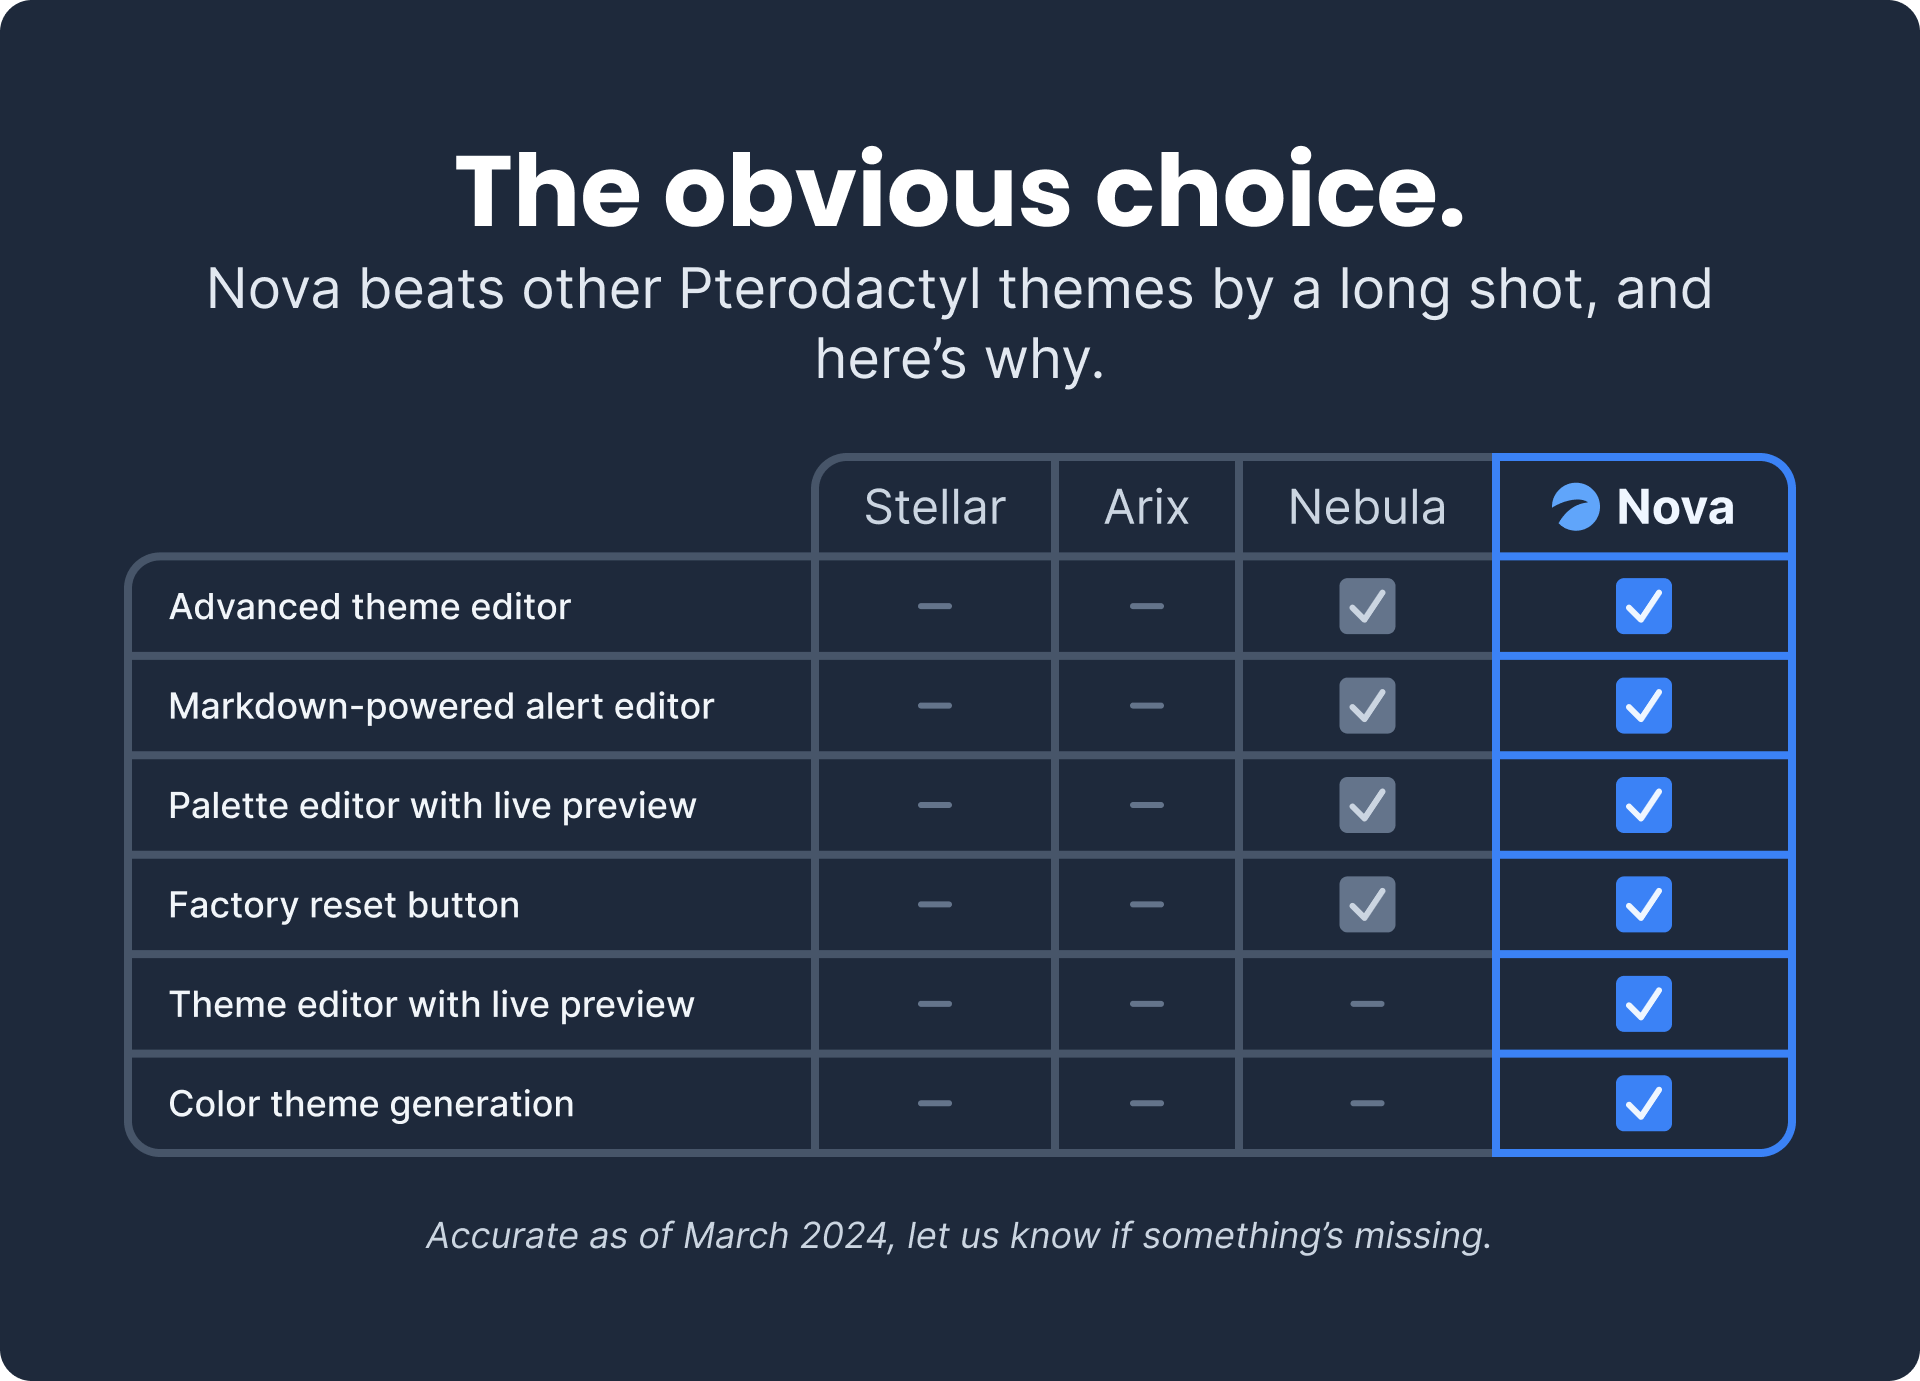 The obvious choice. Nova beats other Pterodactyl themes by a long shot.